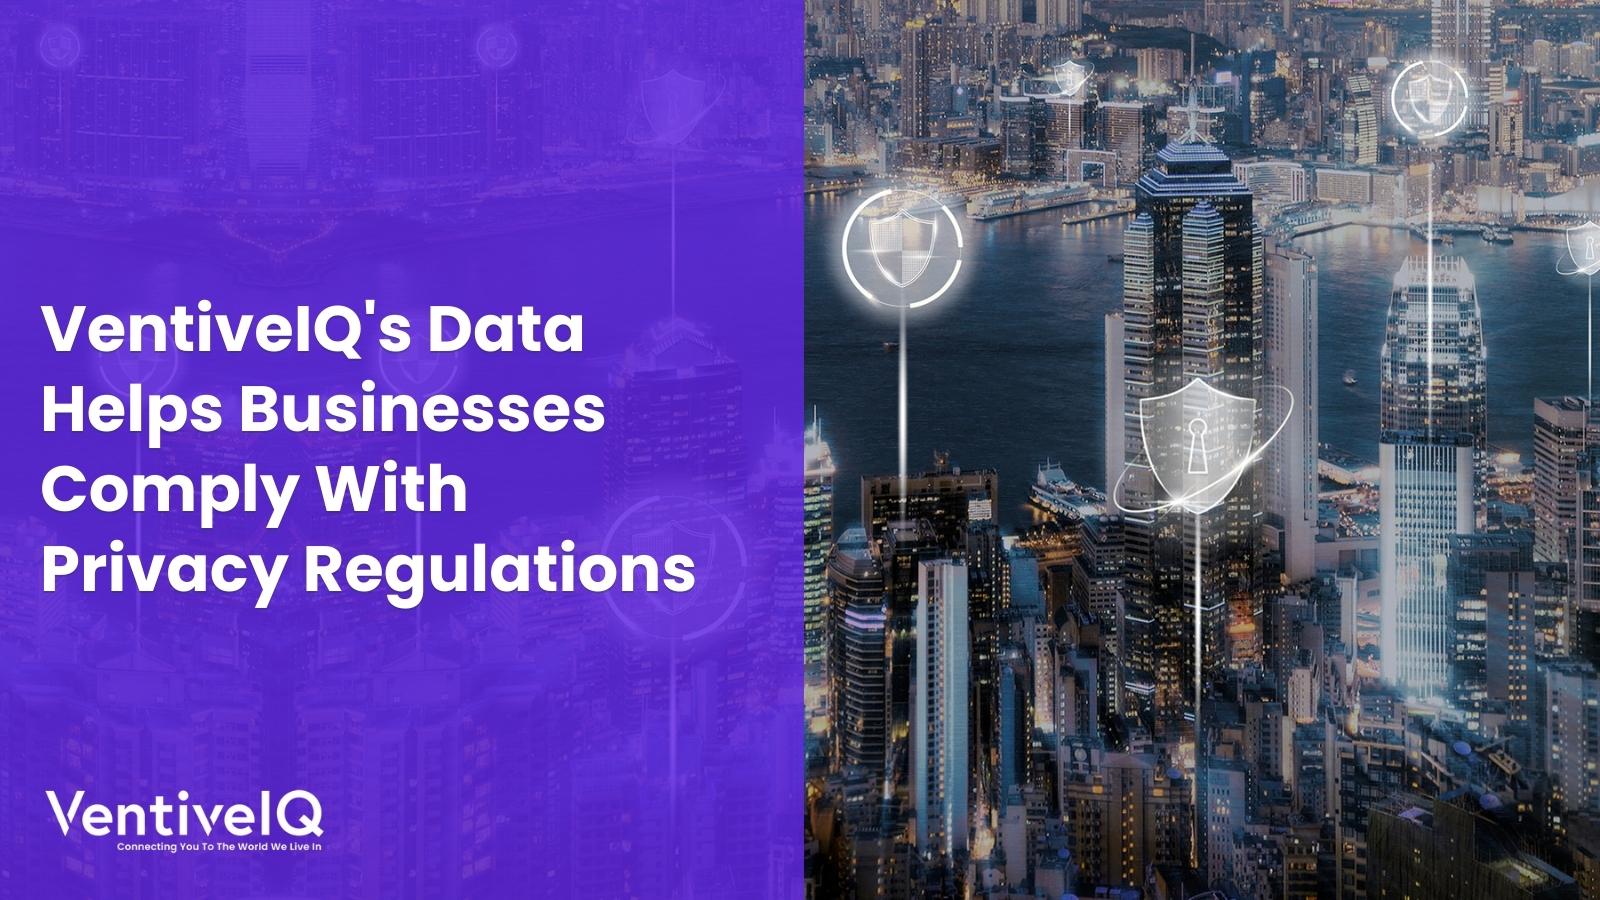 VentiveIQ’s Data Helps Businesses Comply With Privacy Regulations